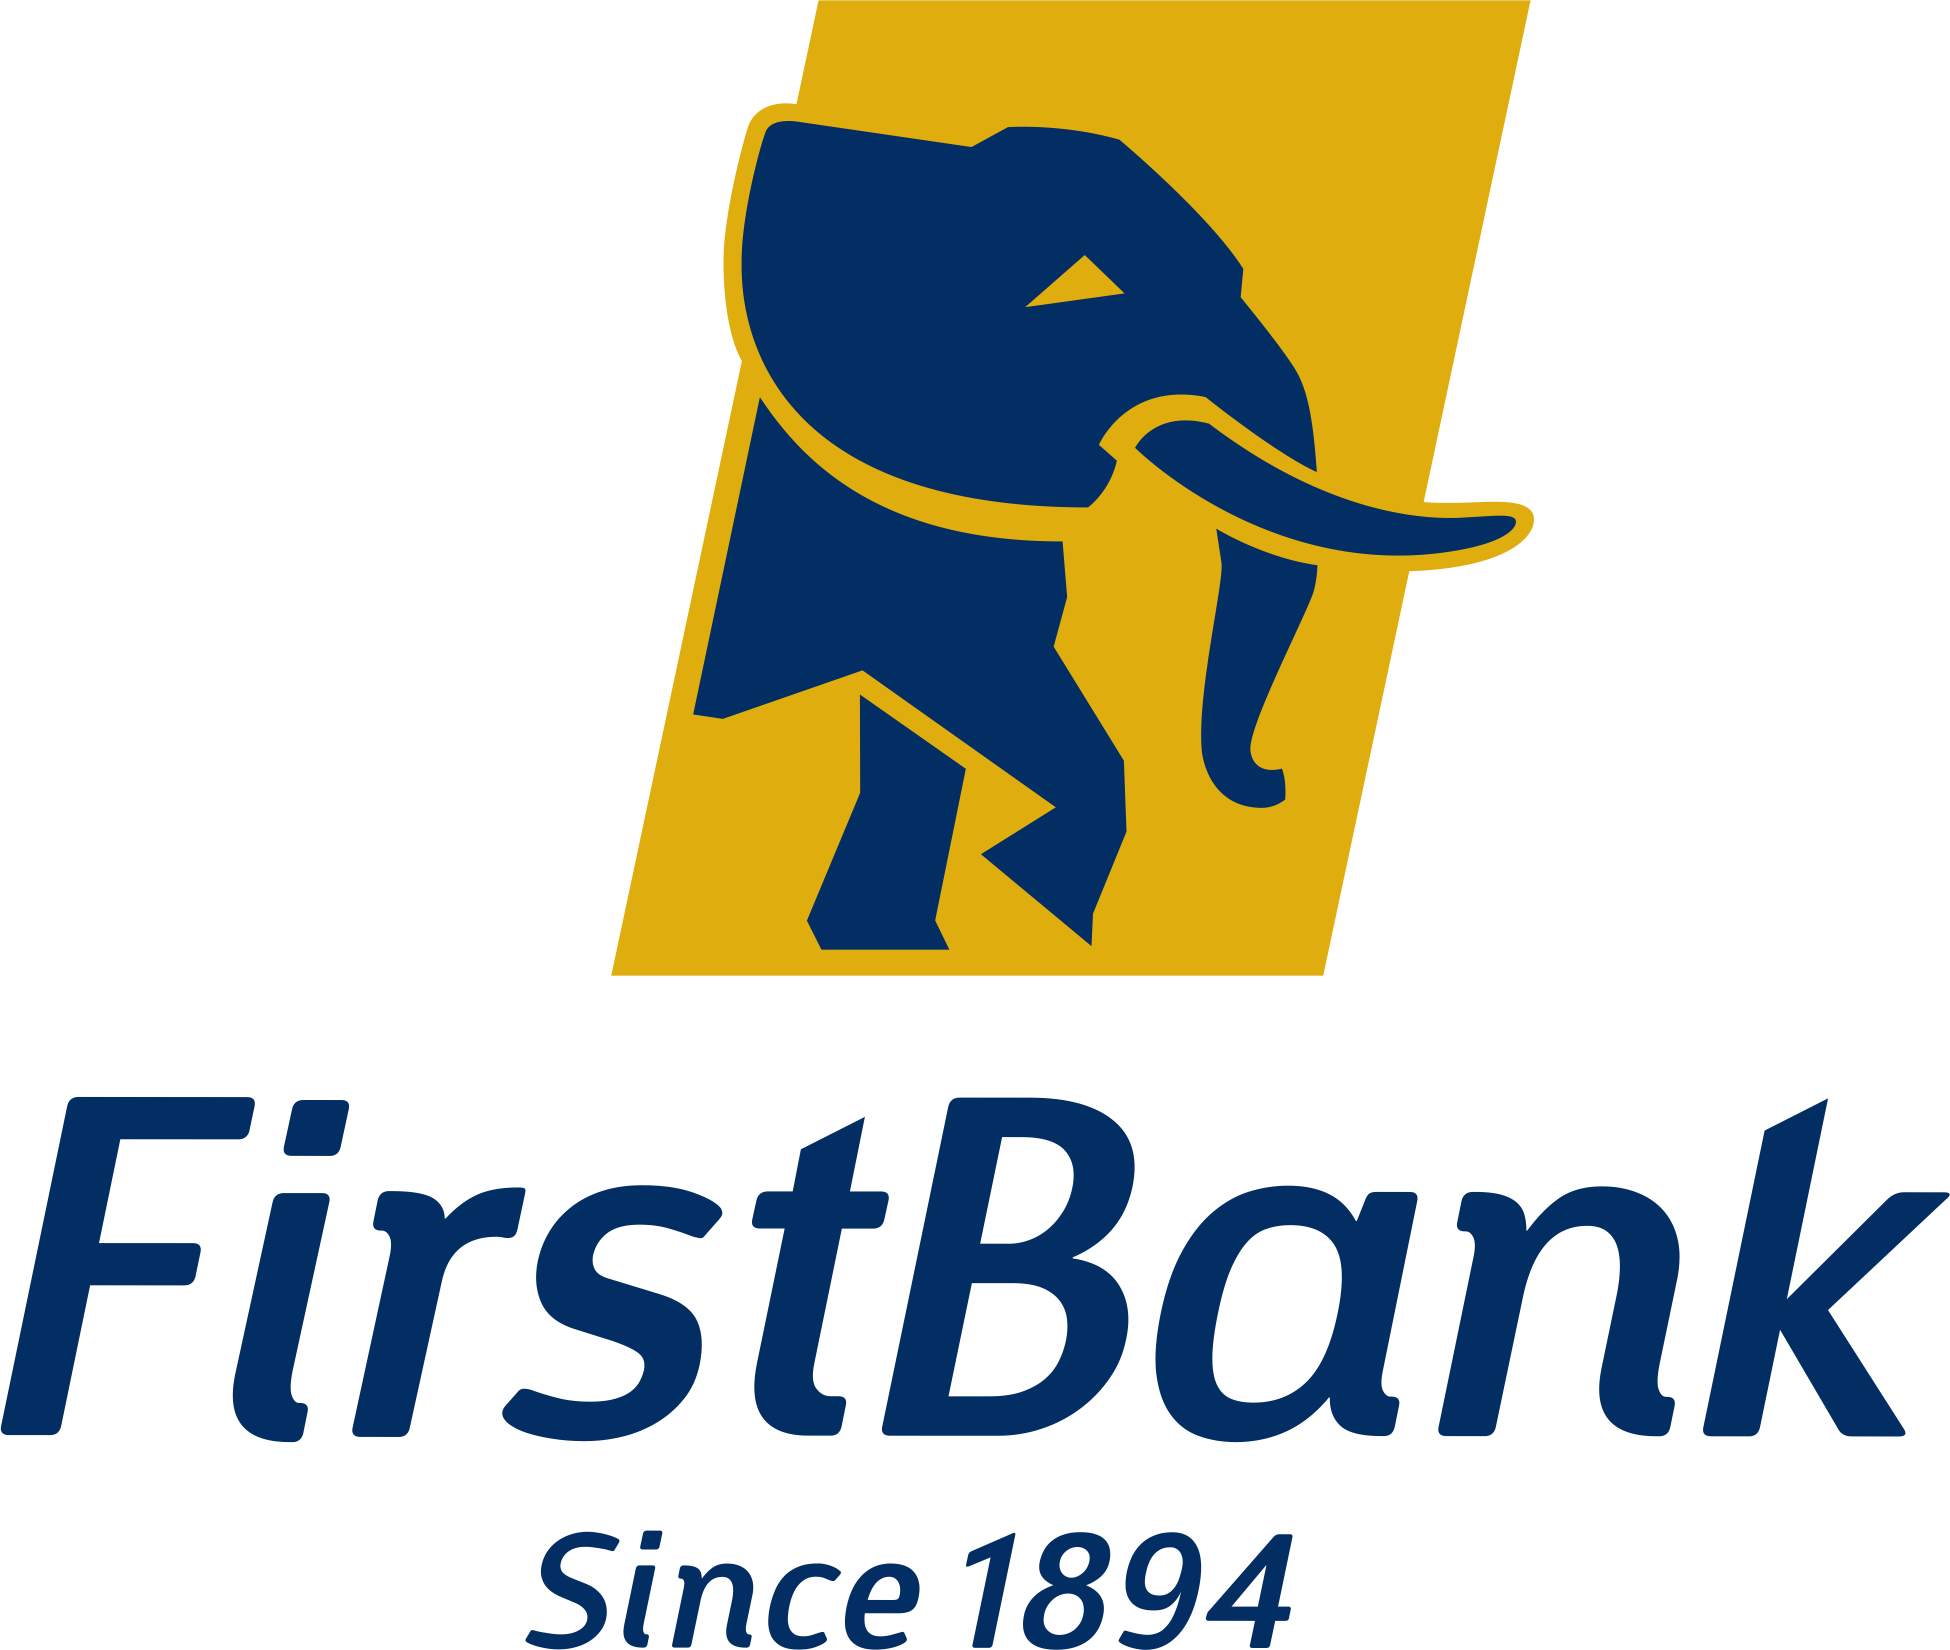 Firstbank Dedicates The Month Of March To Celebrate Women, Reinforces Its Commitment To Empowering Women